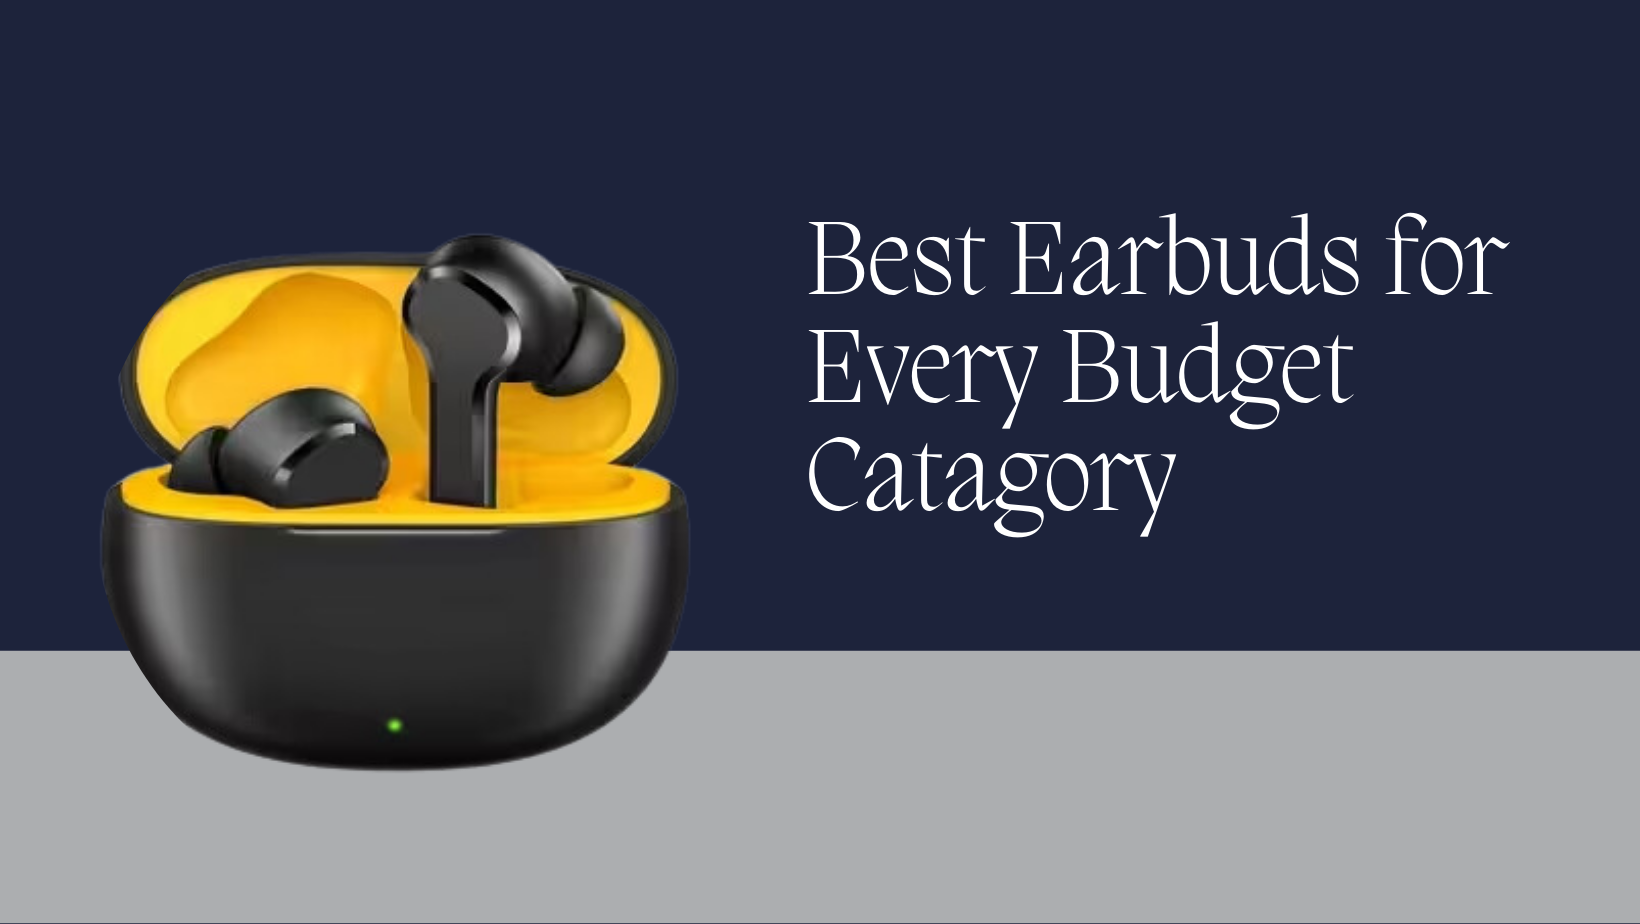 Best Earbuds for Every Budget Category